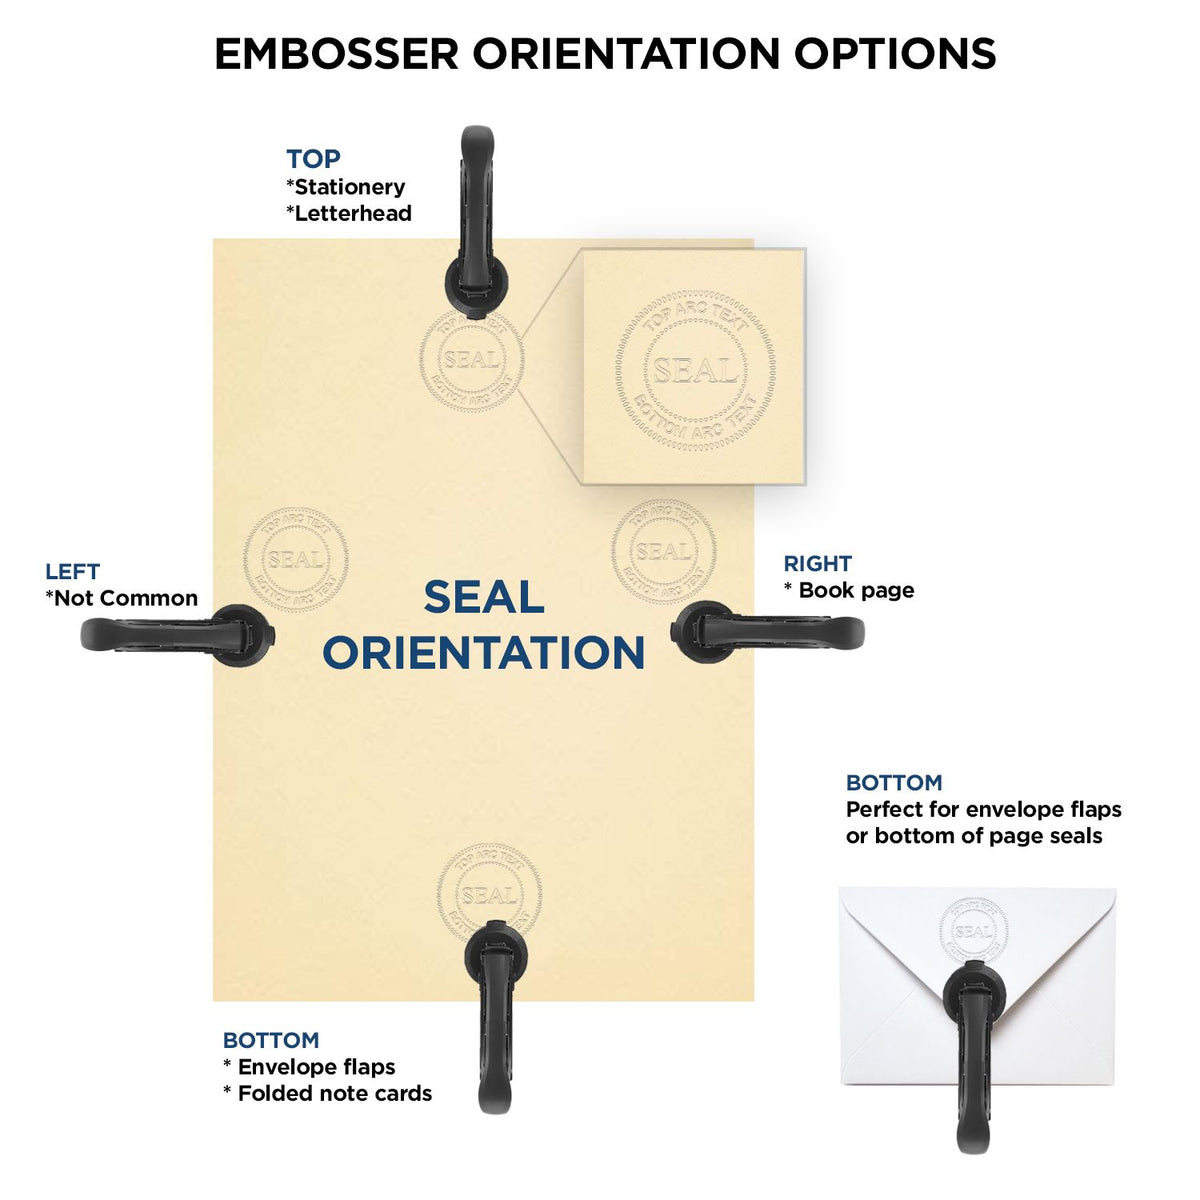 An infographic for the Handheld Kansas Land Surveyor Seal showing embosser orientation, this is showing examples of a top, bottom, right and left insert.